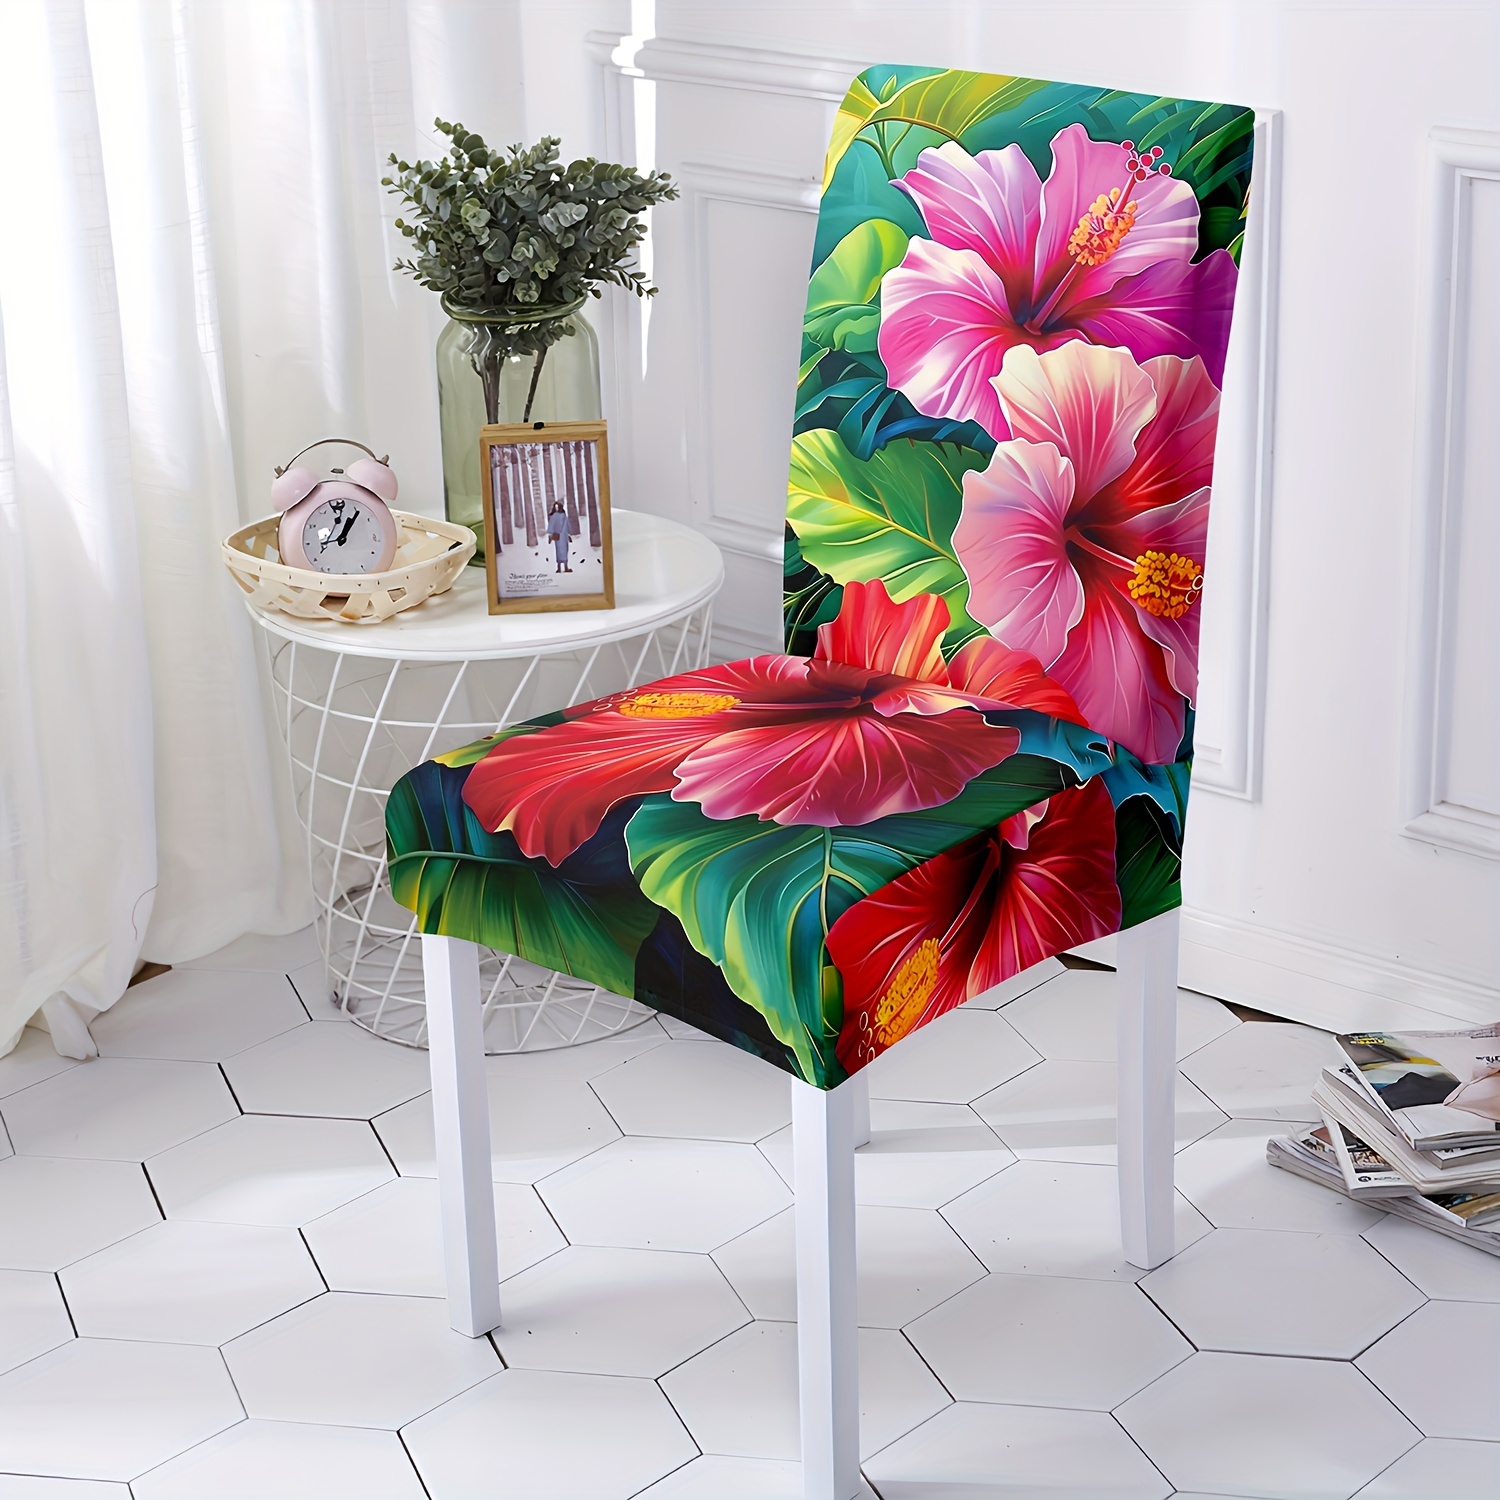 

4/6pc Stretchable & Washable Chair Covers With Green Leaves And Red Flowers - Perfect For Restaurants, Hotels, Banquets, Weddings, And Holiday Decorations